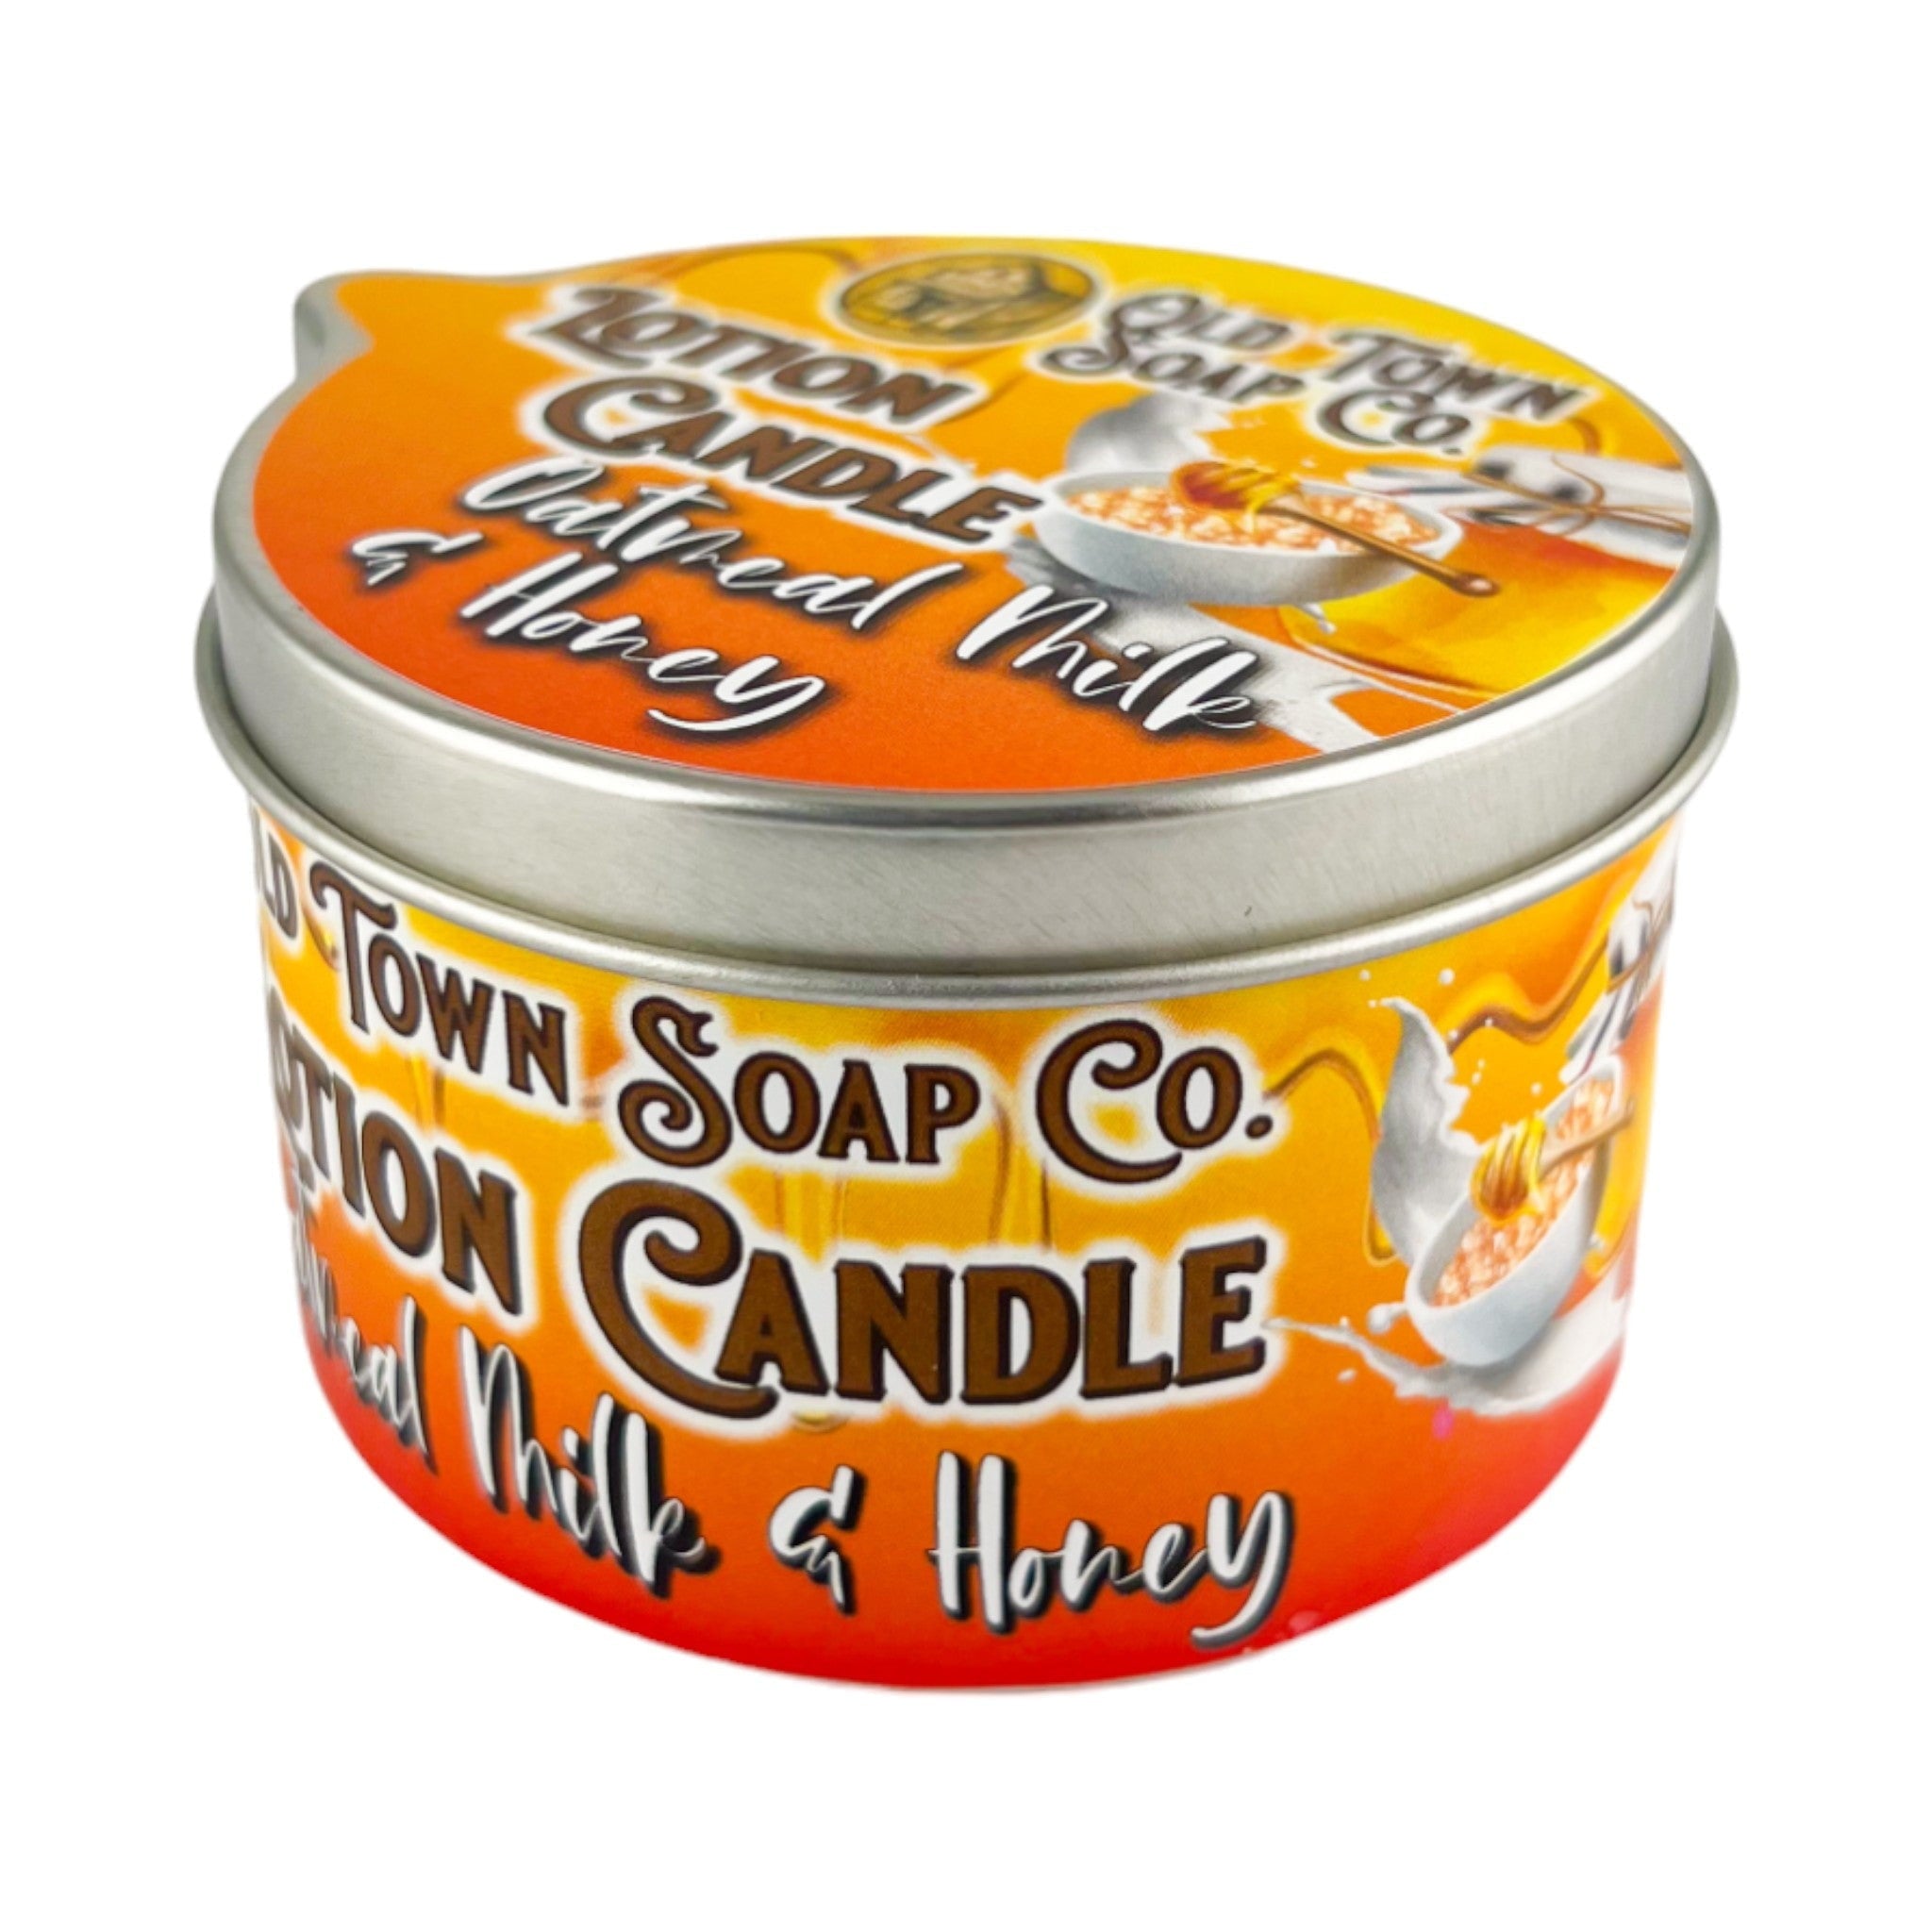 Oatmeal Milk &amp; Honey -Lotion Candles - Old Town Soap Co.